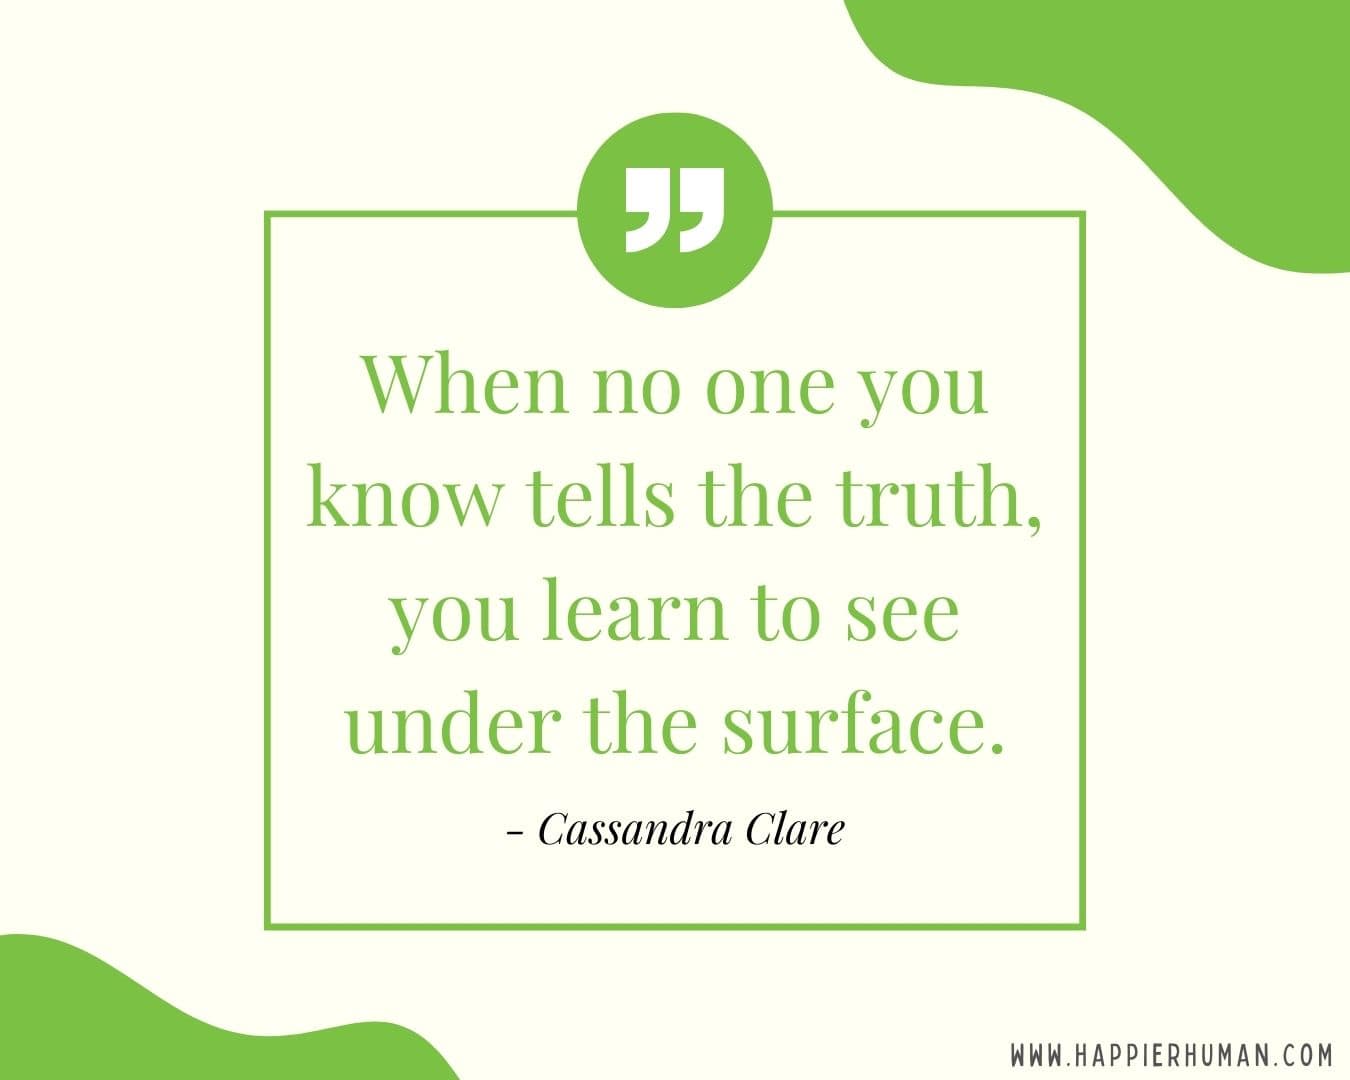 Broken Trust Quotes - “When no one you know tells the truth, you learn to see under the surface.” - Cassandra Clare